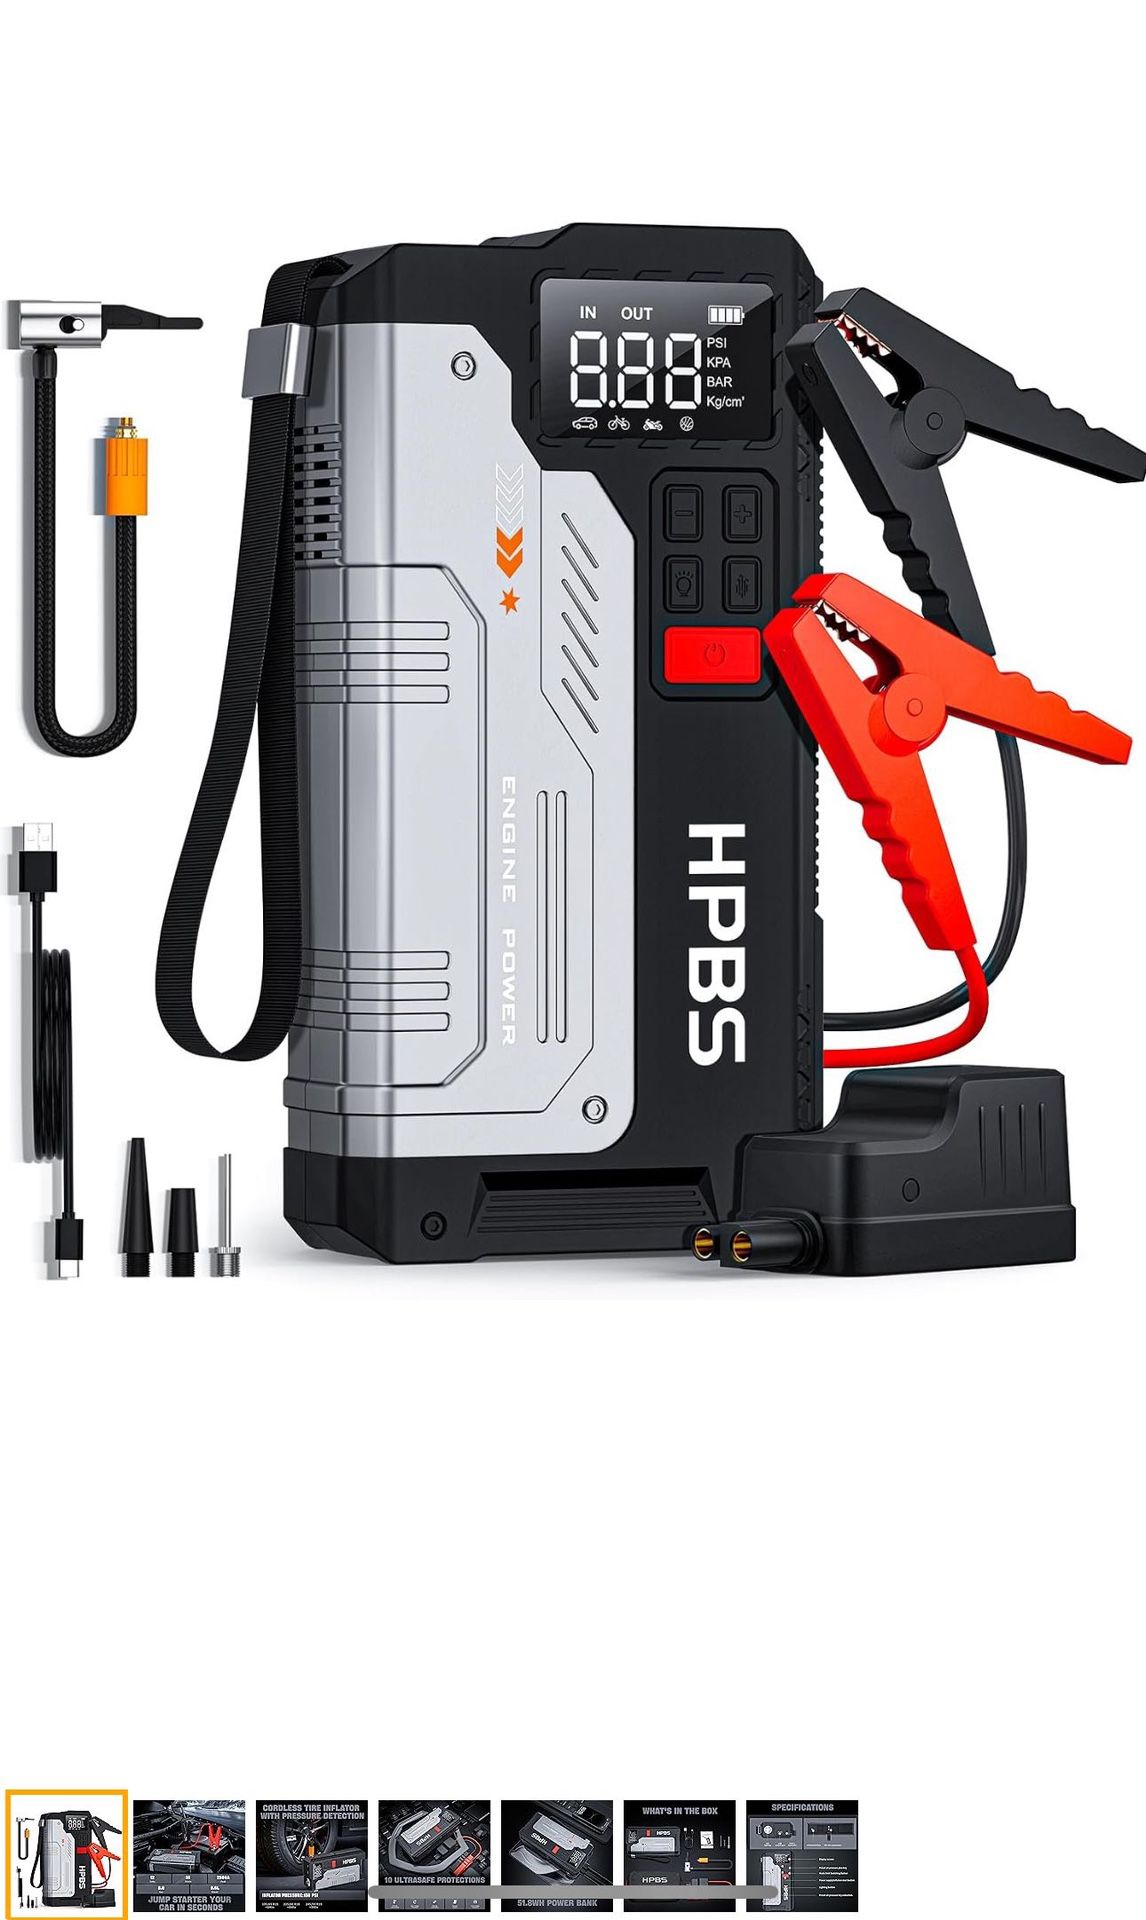 Jump Starter with Air Compressor - 2500A Car Jump Starter with 150 PSI Tire Inflator for Up to 8.0L Gas and 6.5L Diesel Engines, 12V Portable Jump Sta